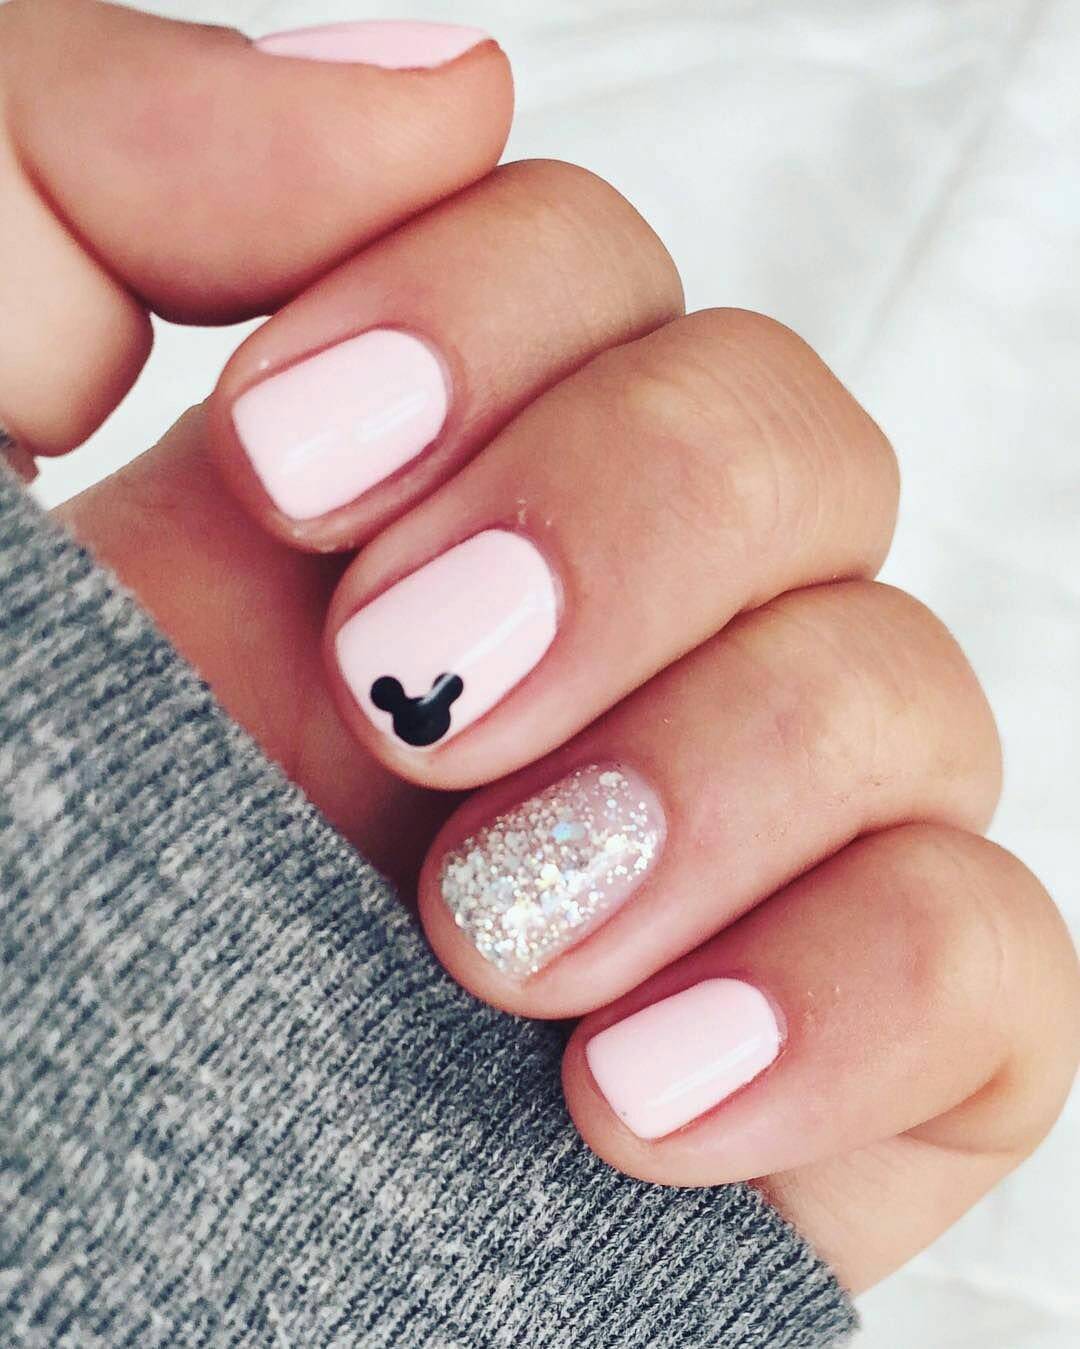 These Disney Nail Art Ideas Will Inspire Your Next Magical Manicure